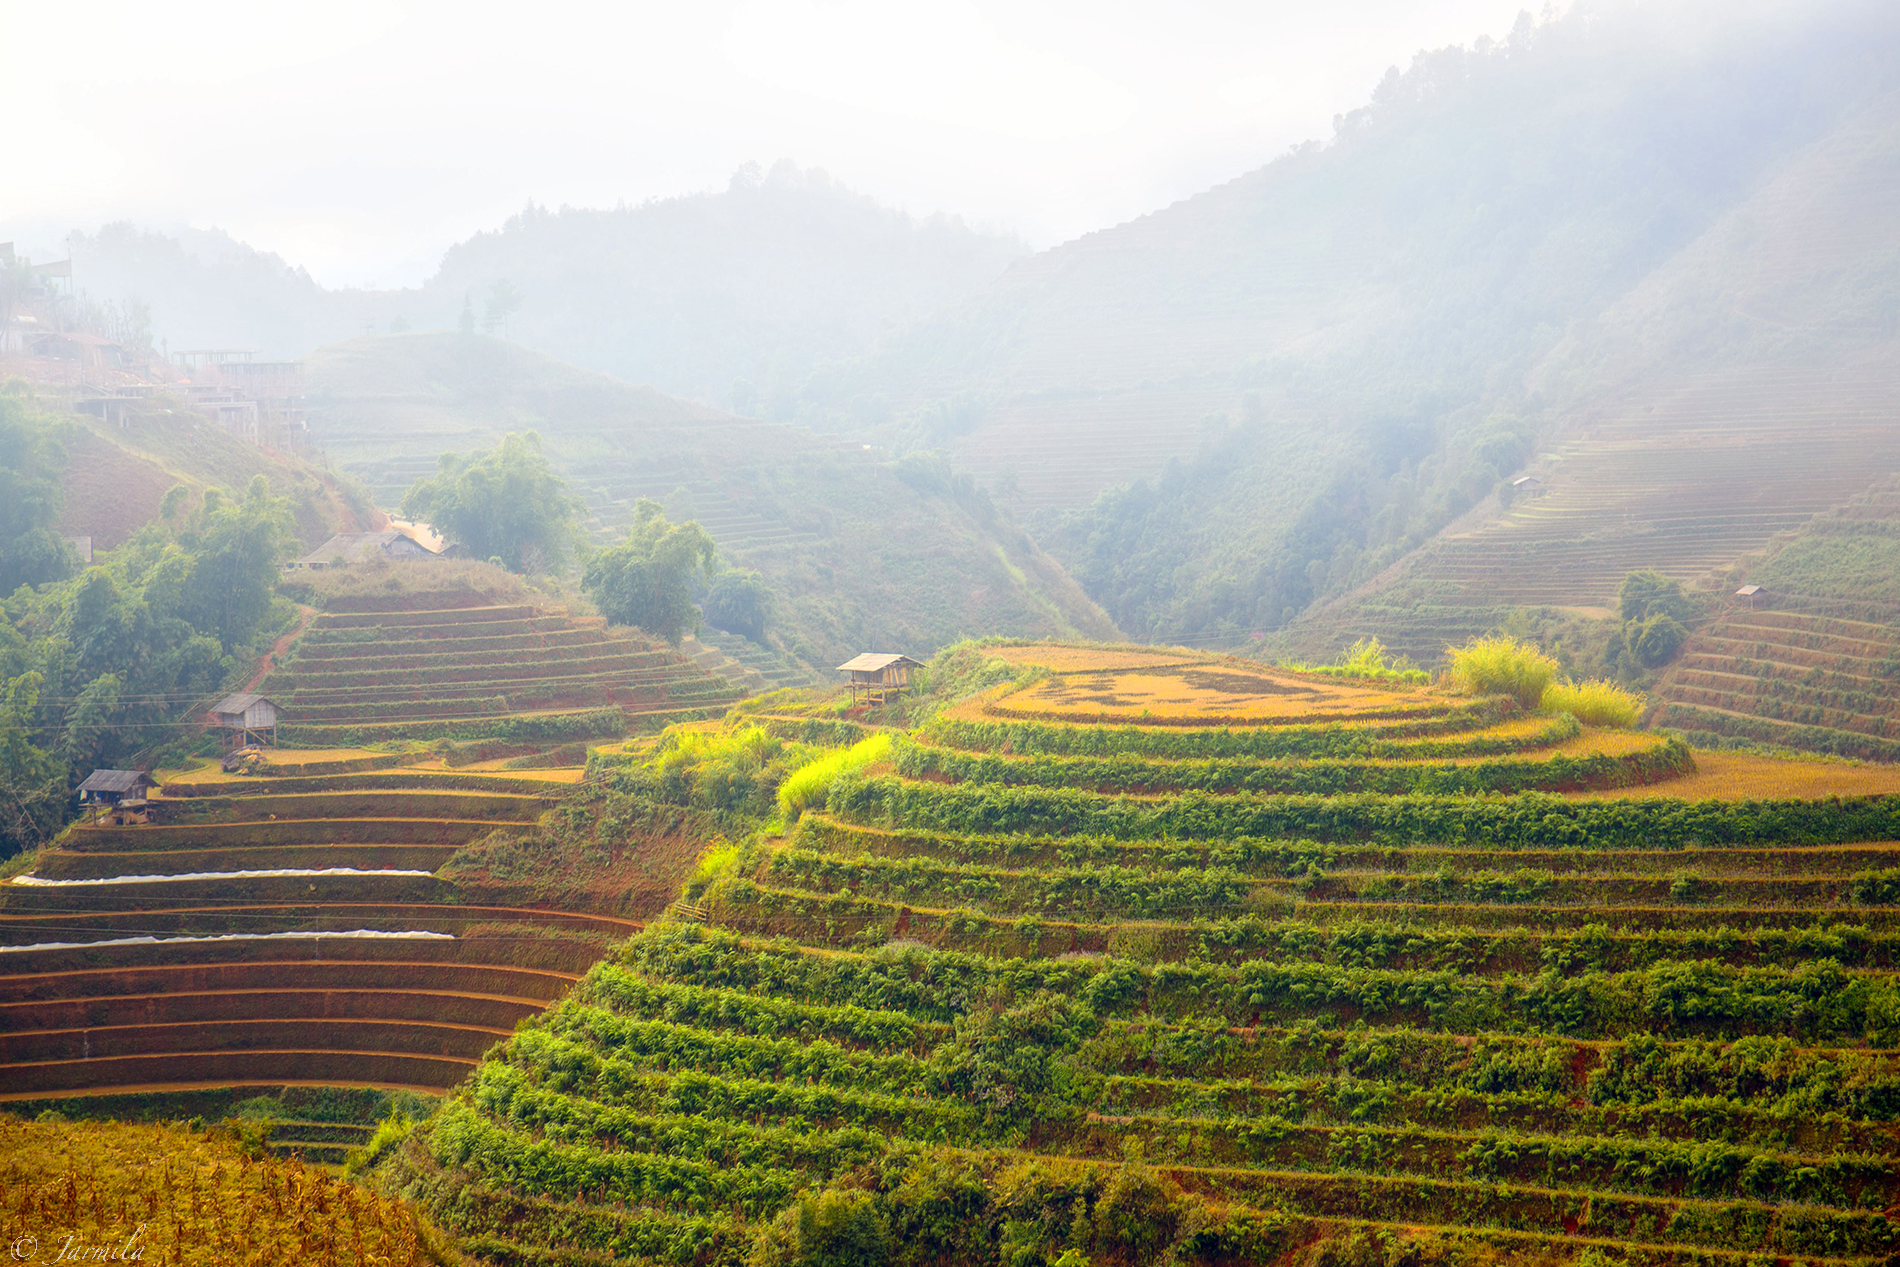 Mu Cang Chai's rice paddies wrapped in mist...